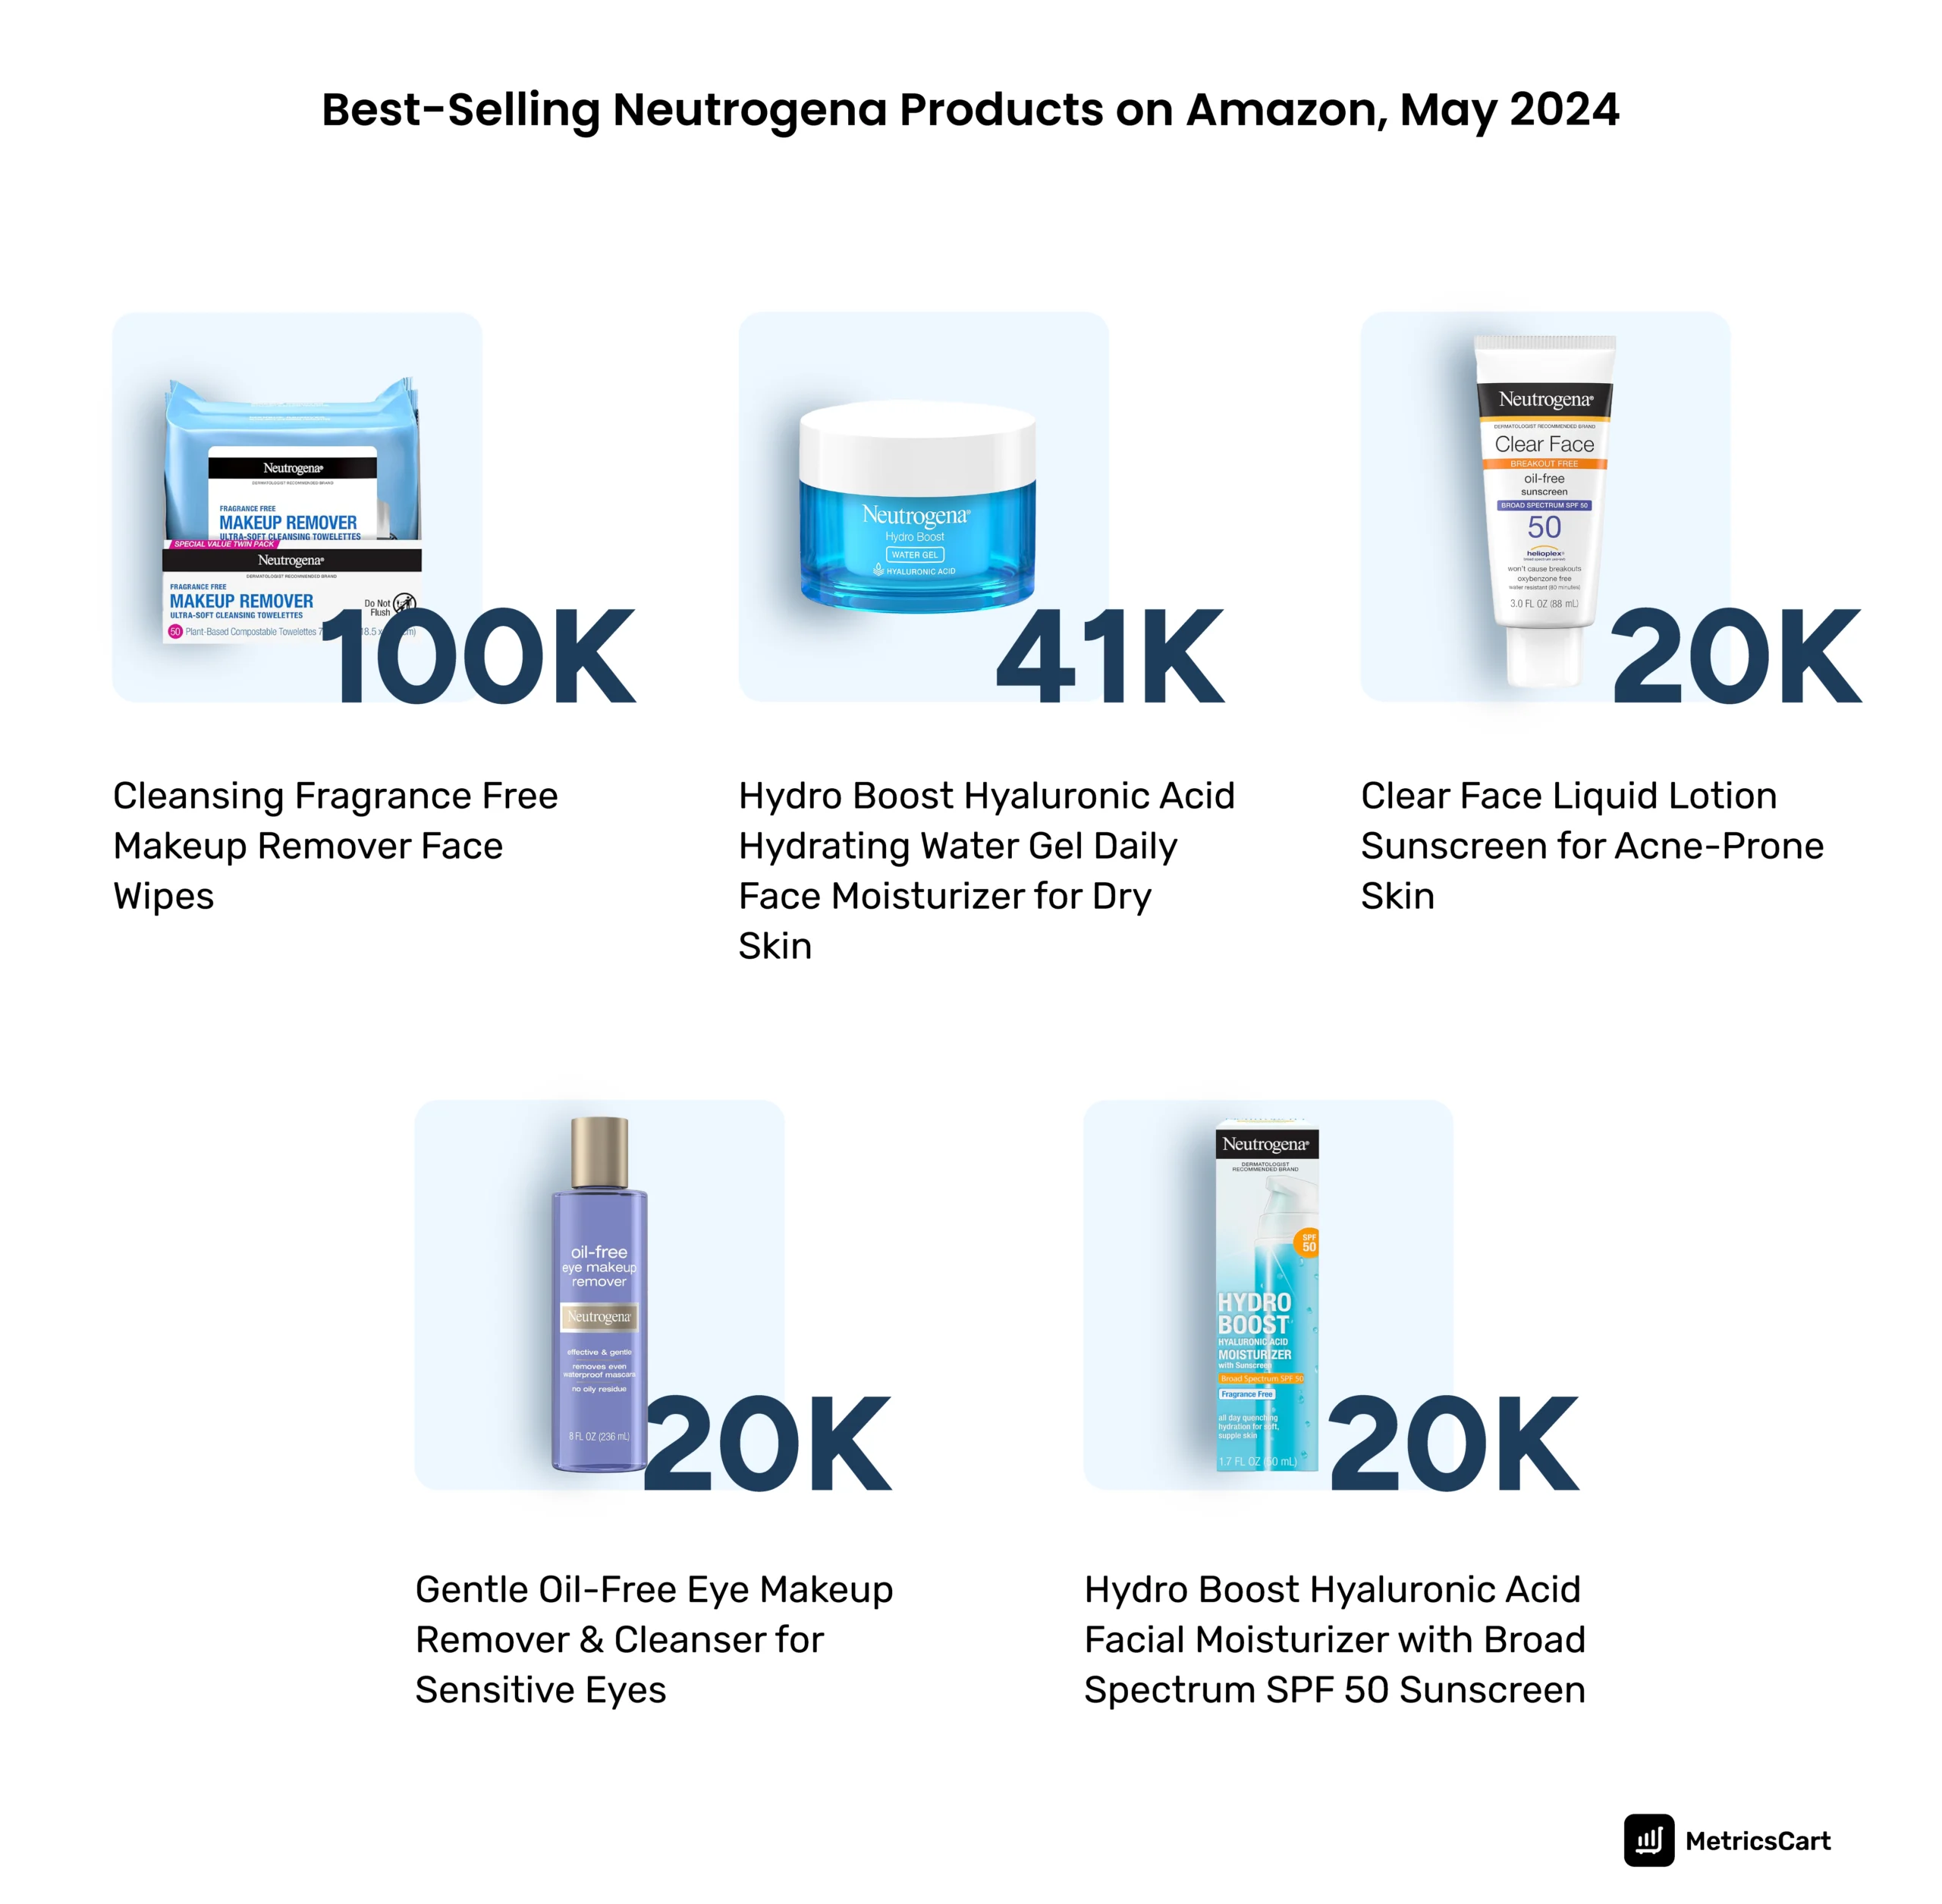 best-selling Neutrogena products on Amazon for May 2024